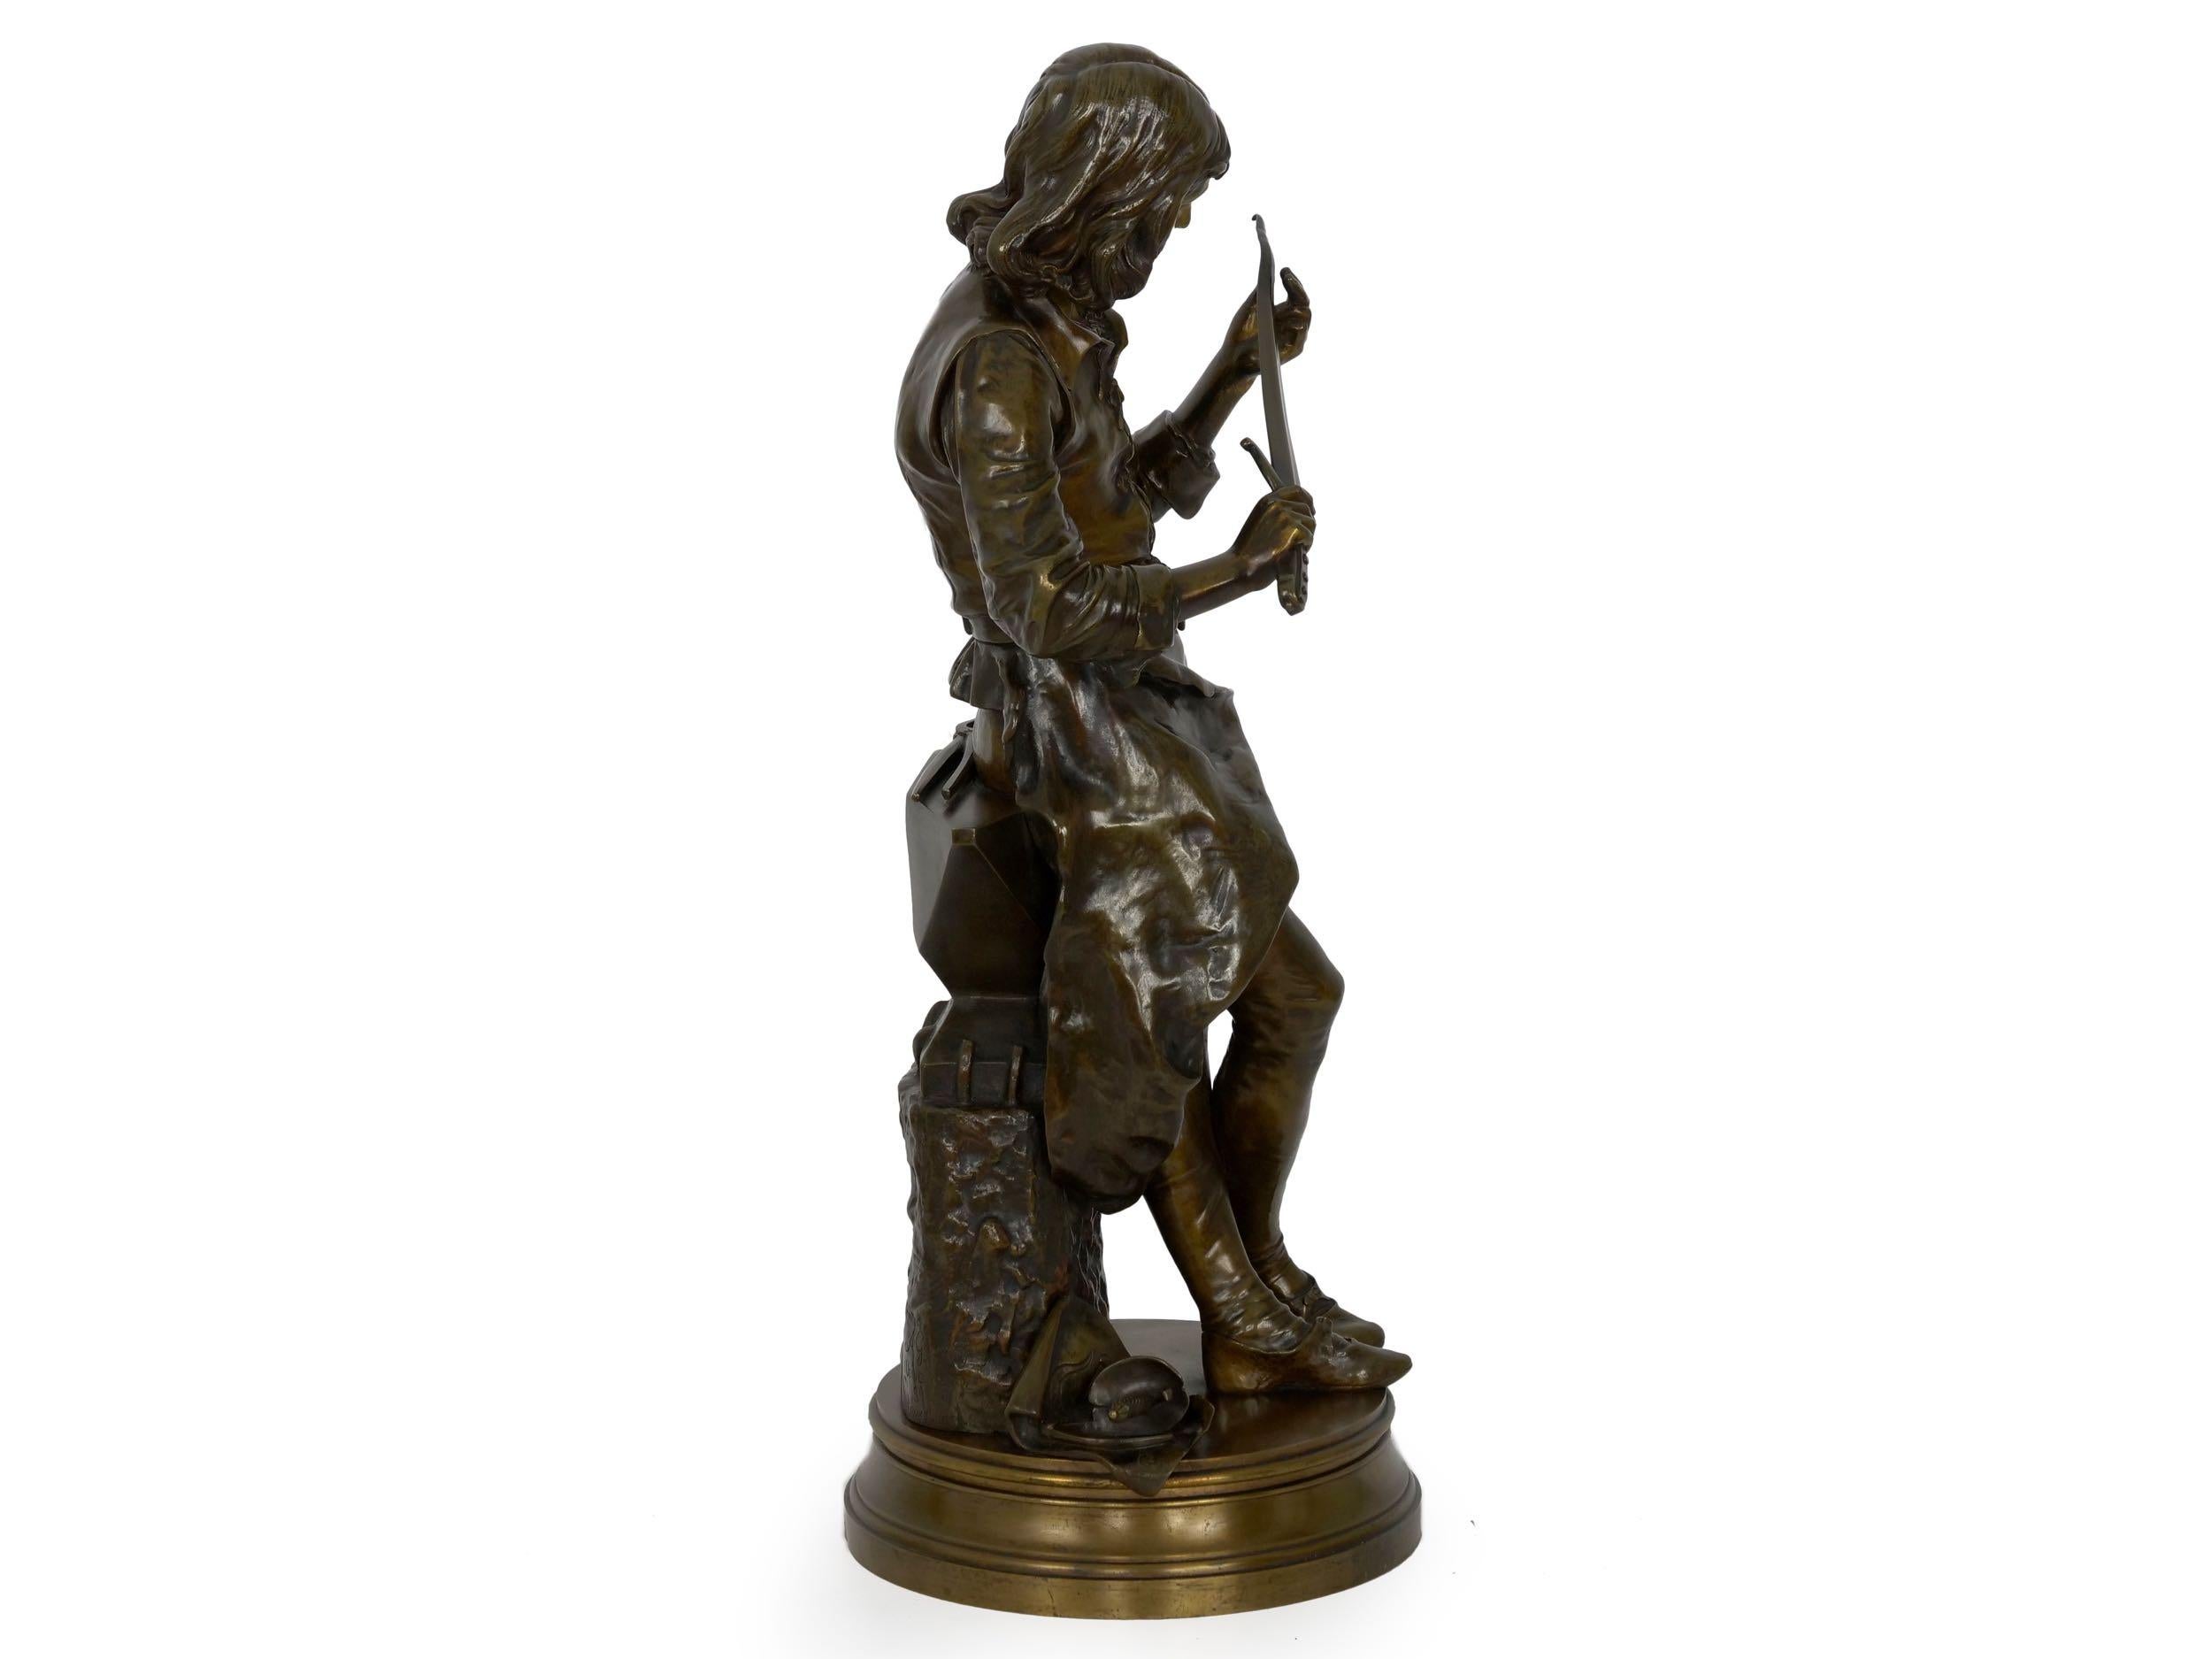 19th Century “A Young Bladesmith” French Antique Bronze Sculpture by Adrien-Étienne Gaudez